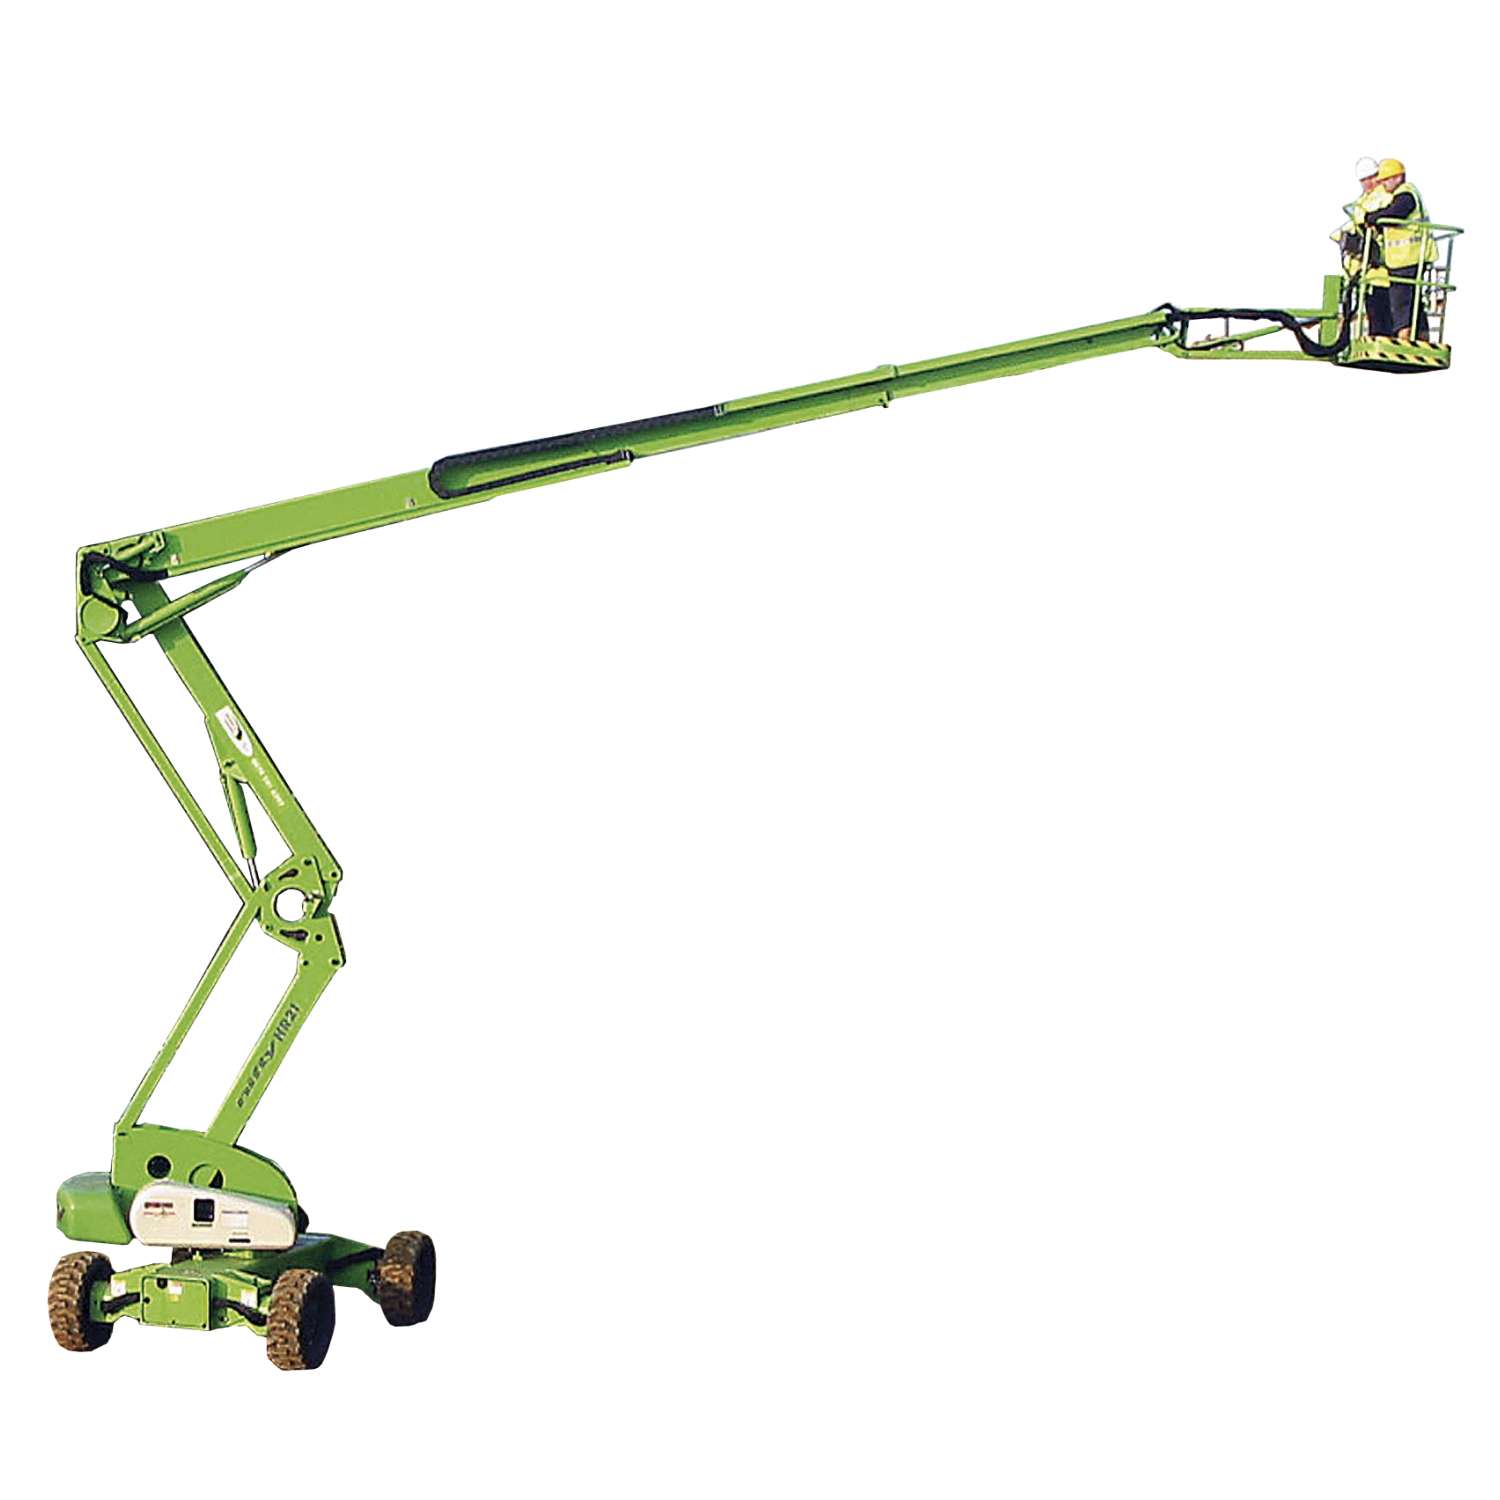 Niftylift HR21D Articulated Boom/Cherry Picker (WH 20.8m) Video